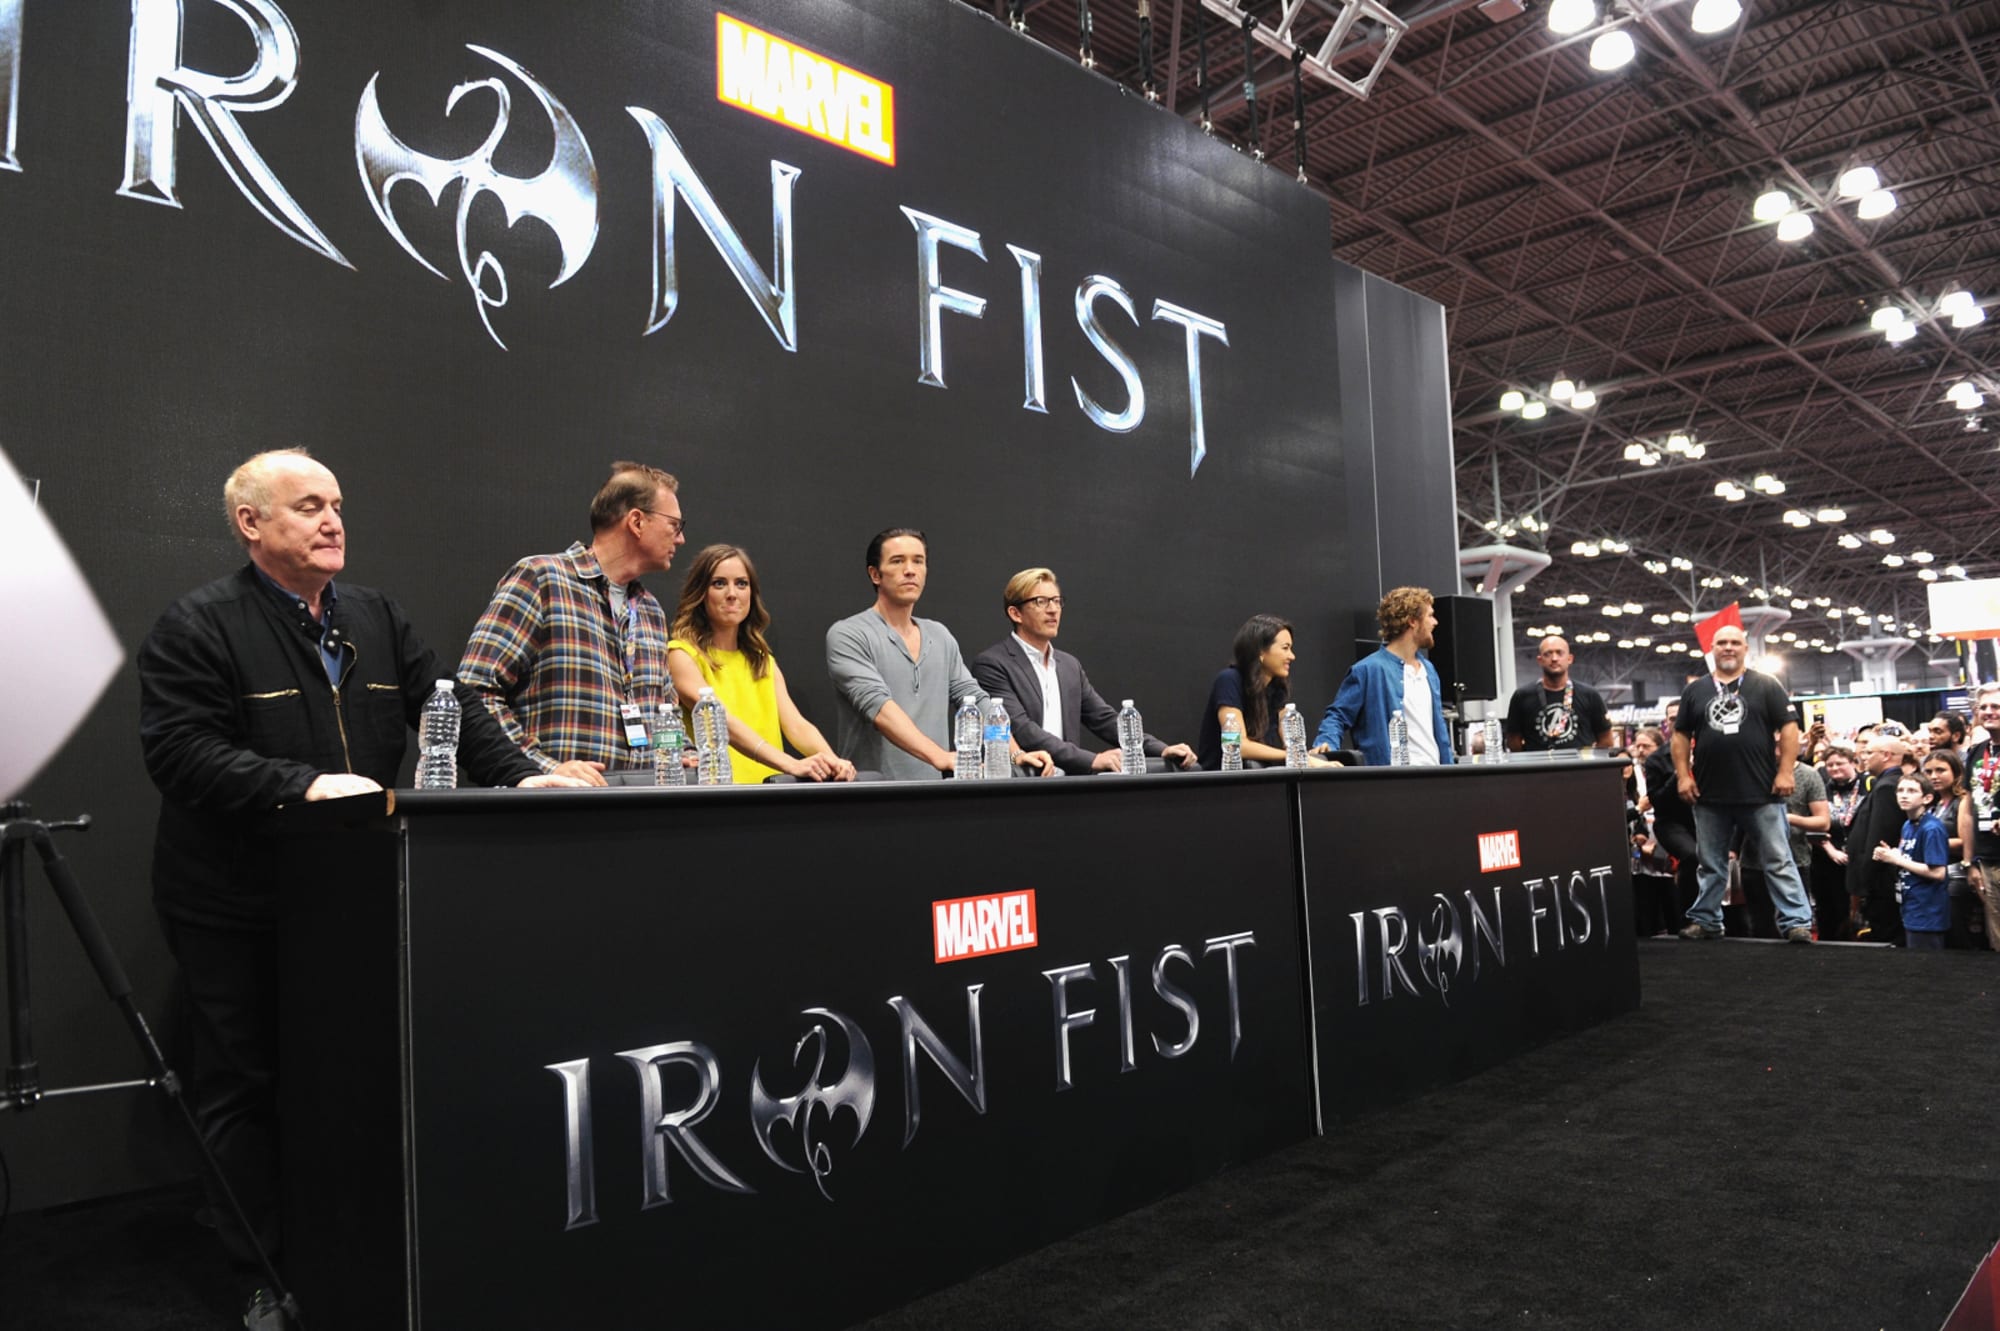 Marvel’s Iron Fist season 2 release date announced in new